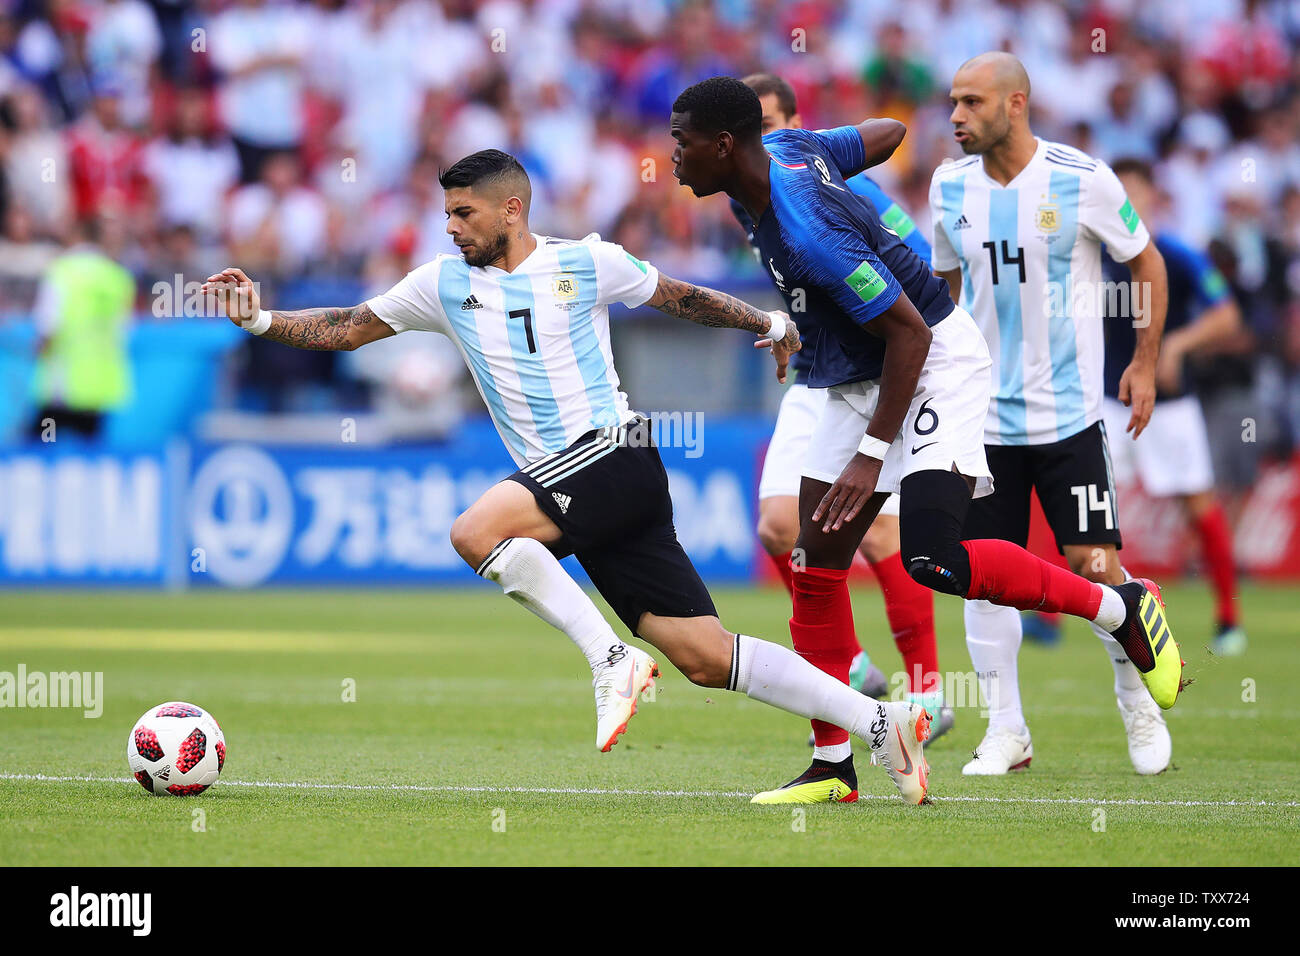 Paul Pogba (R) of France competes for the ball with Ever Banega of  Argentina during the 2018 FIFA World Cup Round of 16 match at Kazan Arena  in Kazan, Russia on June